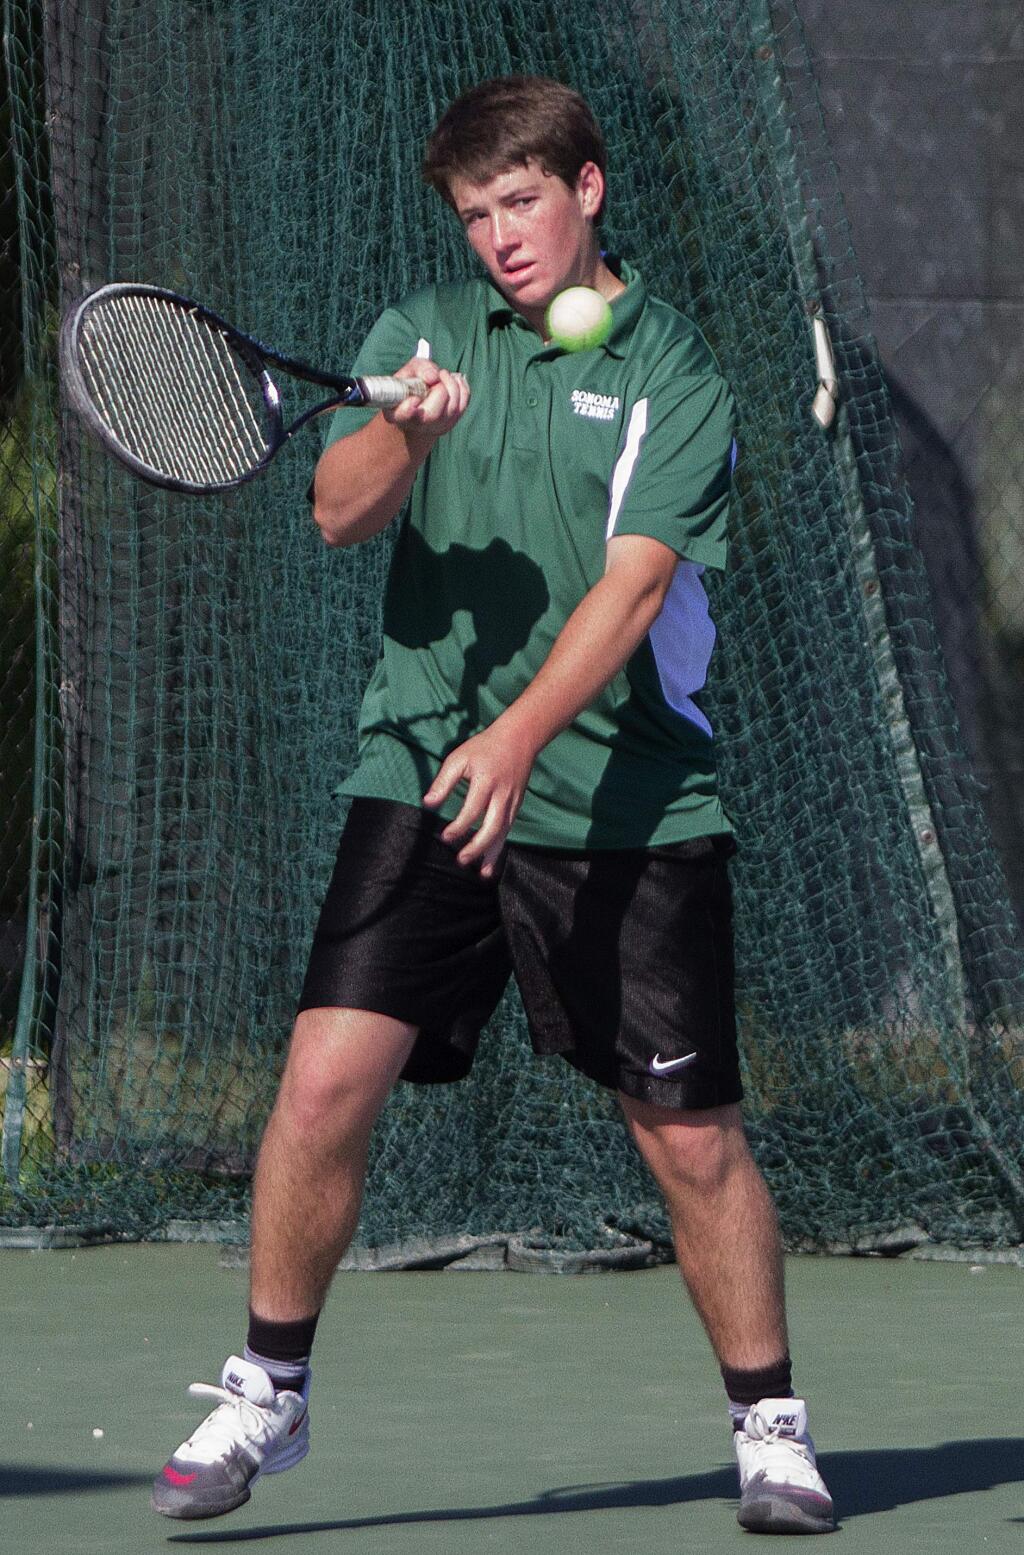 Robbi Pengelly/Index-Tribunesophomore Matt McKale sizes up a return shot en route to recently winning his singles match during the Dragons' shutout of SCL foe Healdsburg on the high school courts.